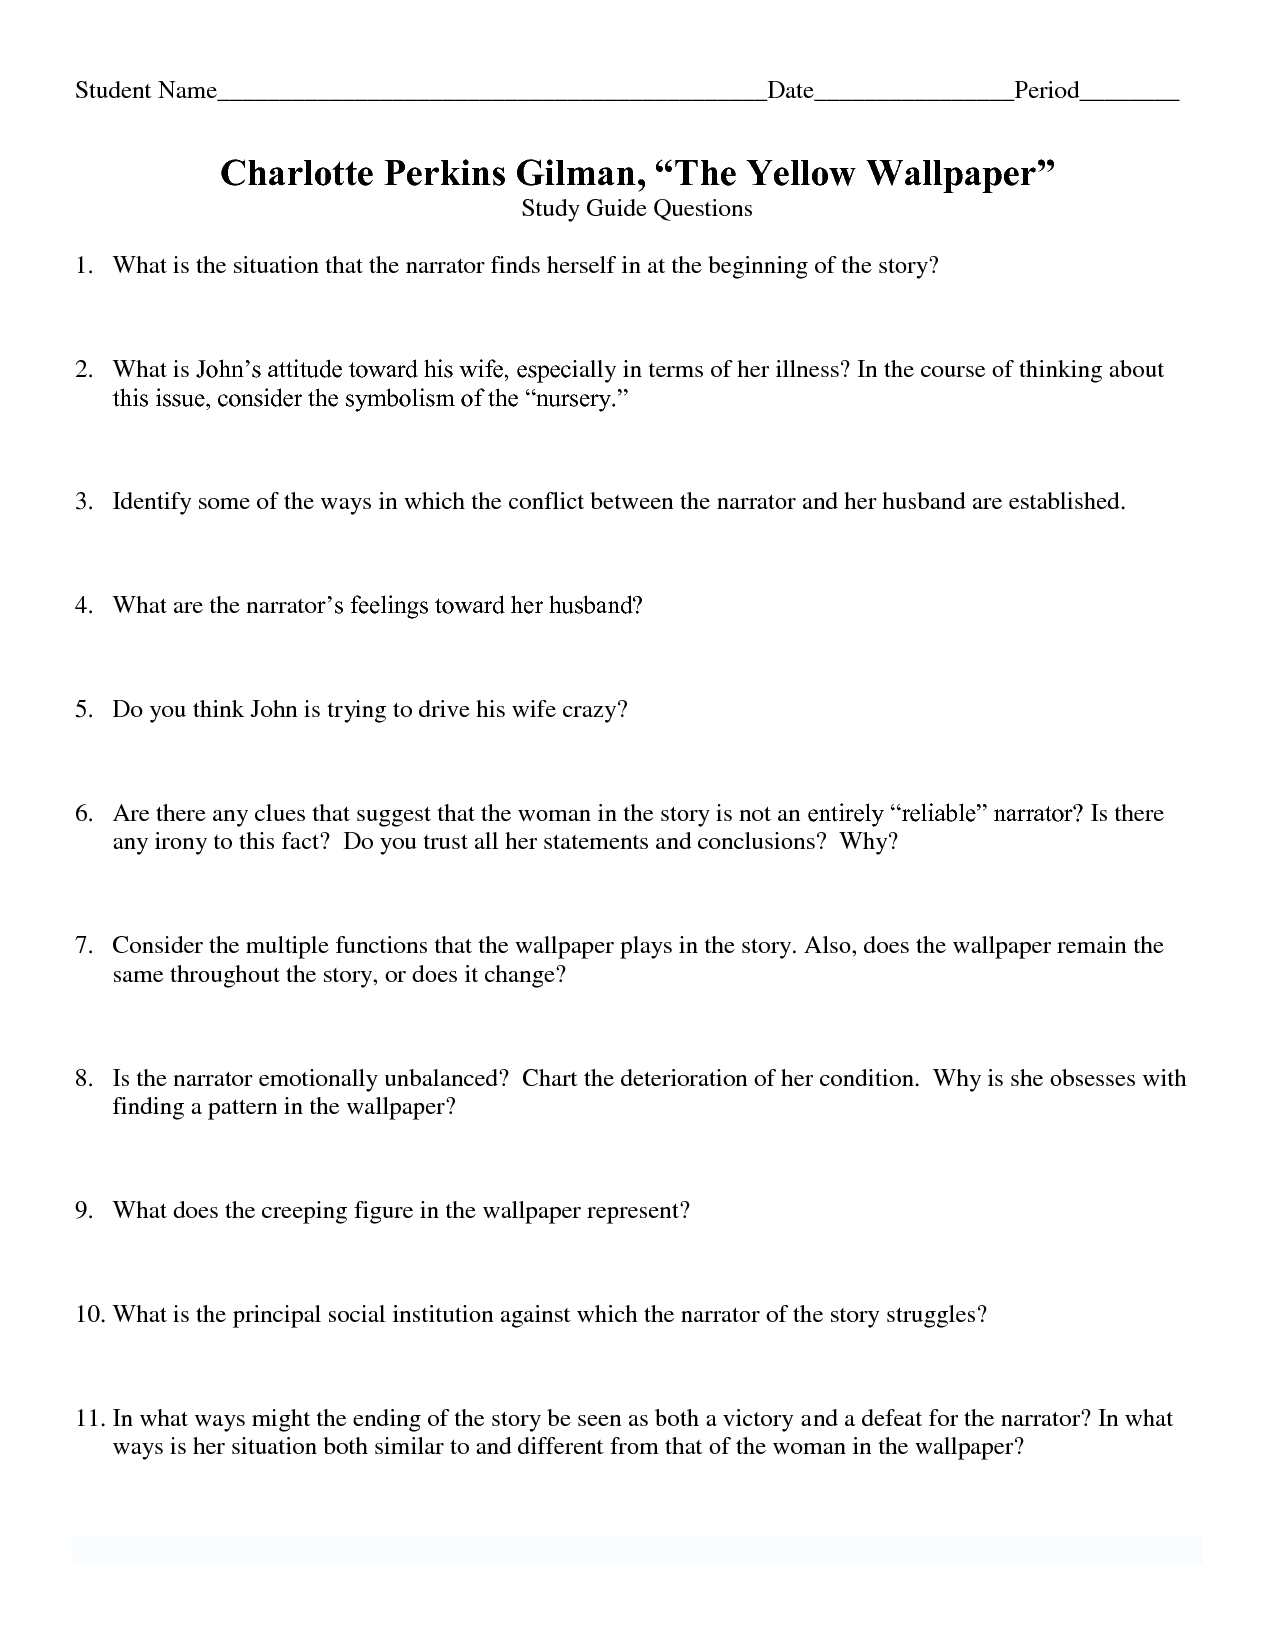 Charlotte Perkins Gilman The Yellow Wallpaper Questions by Electric  English